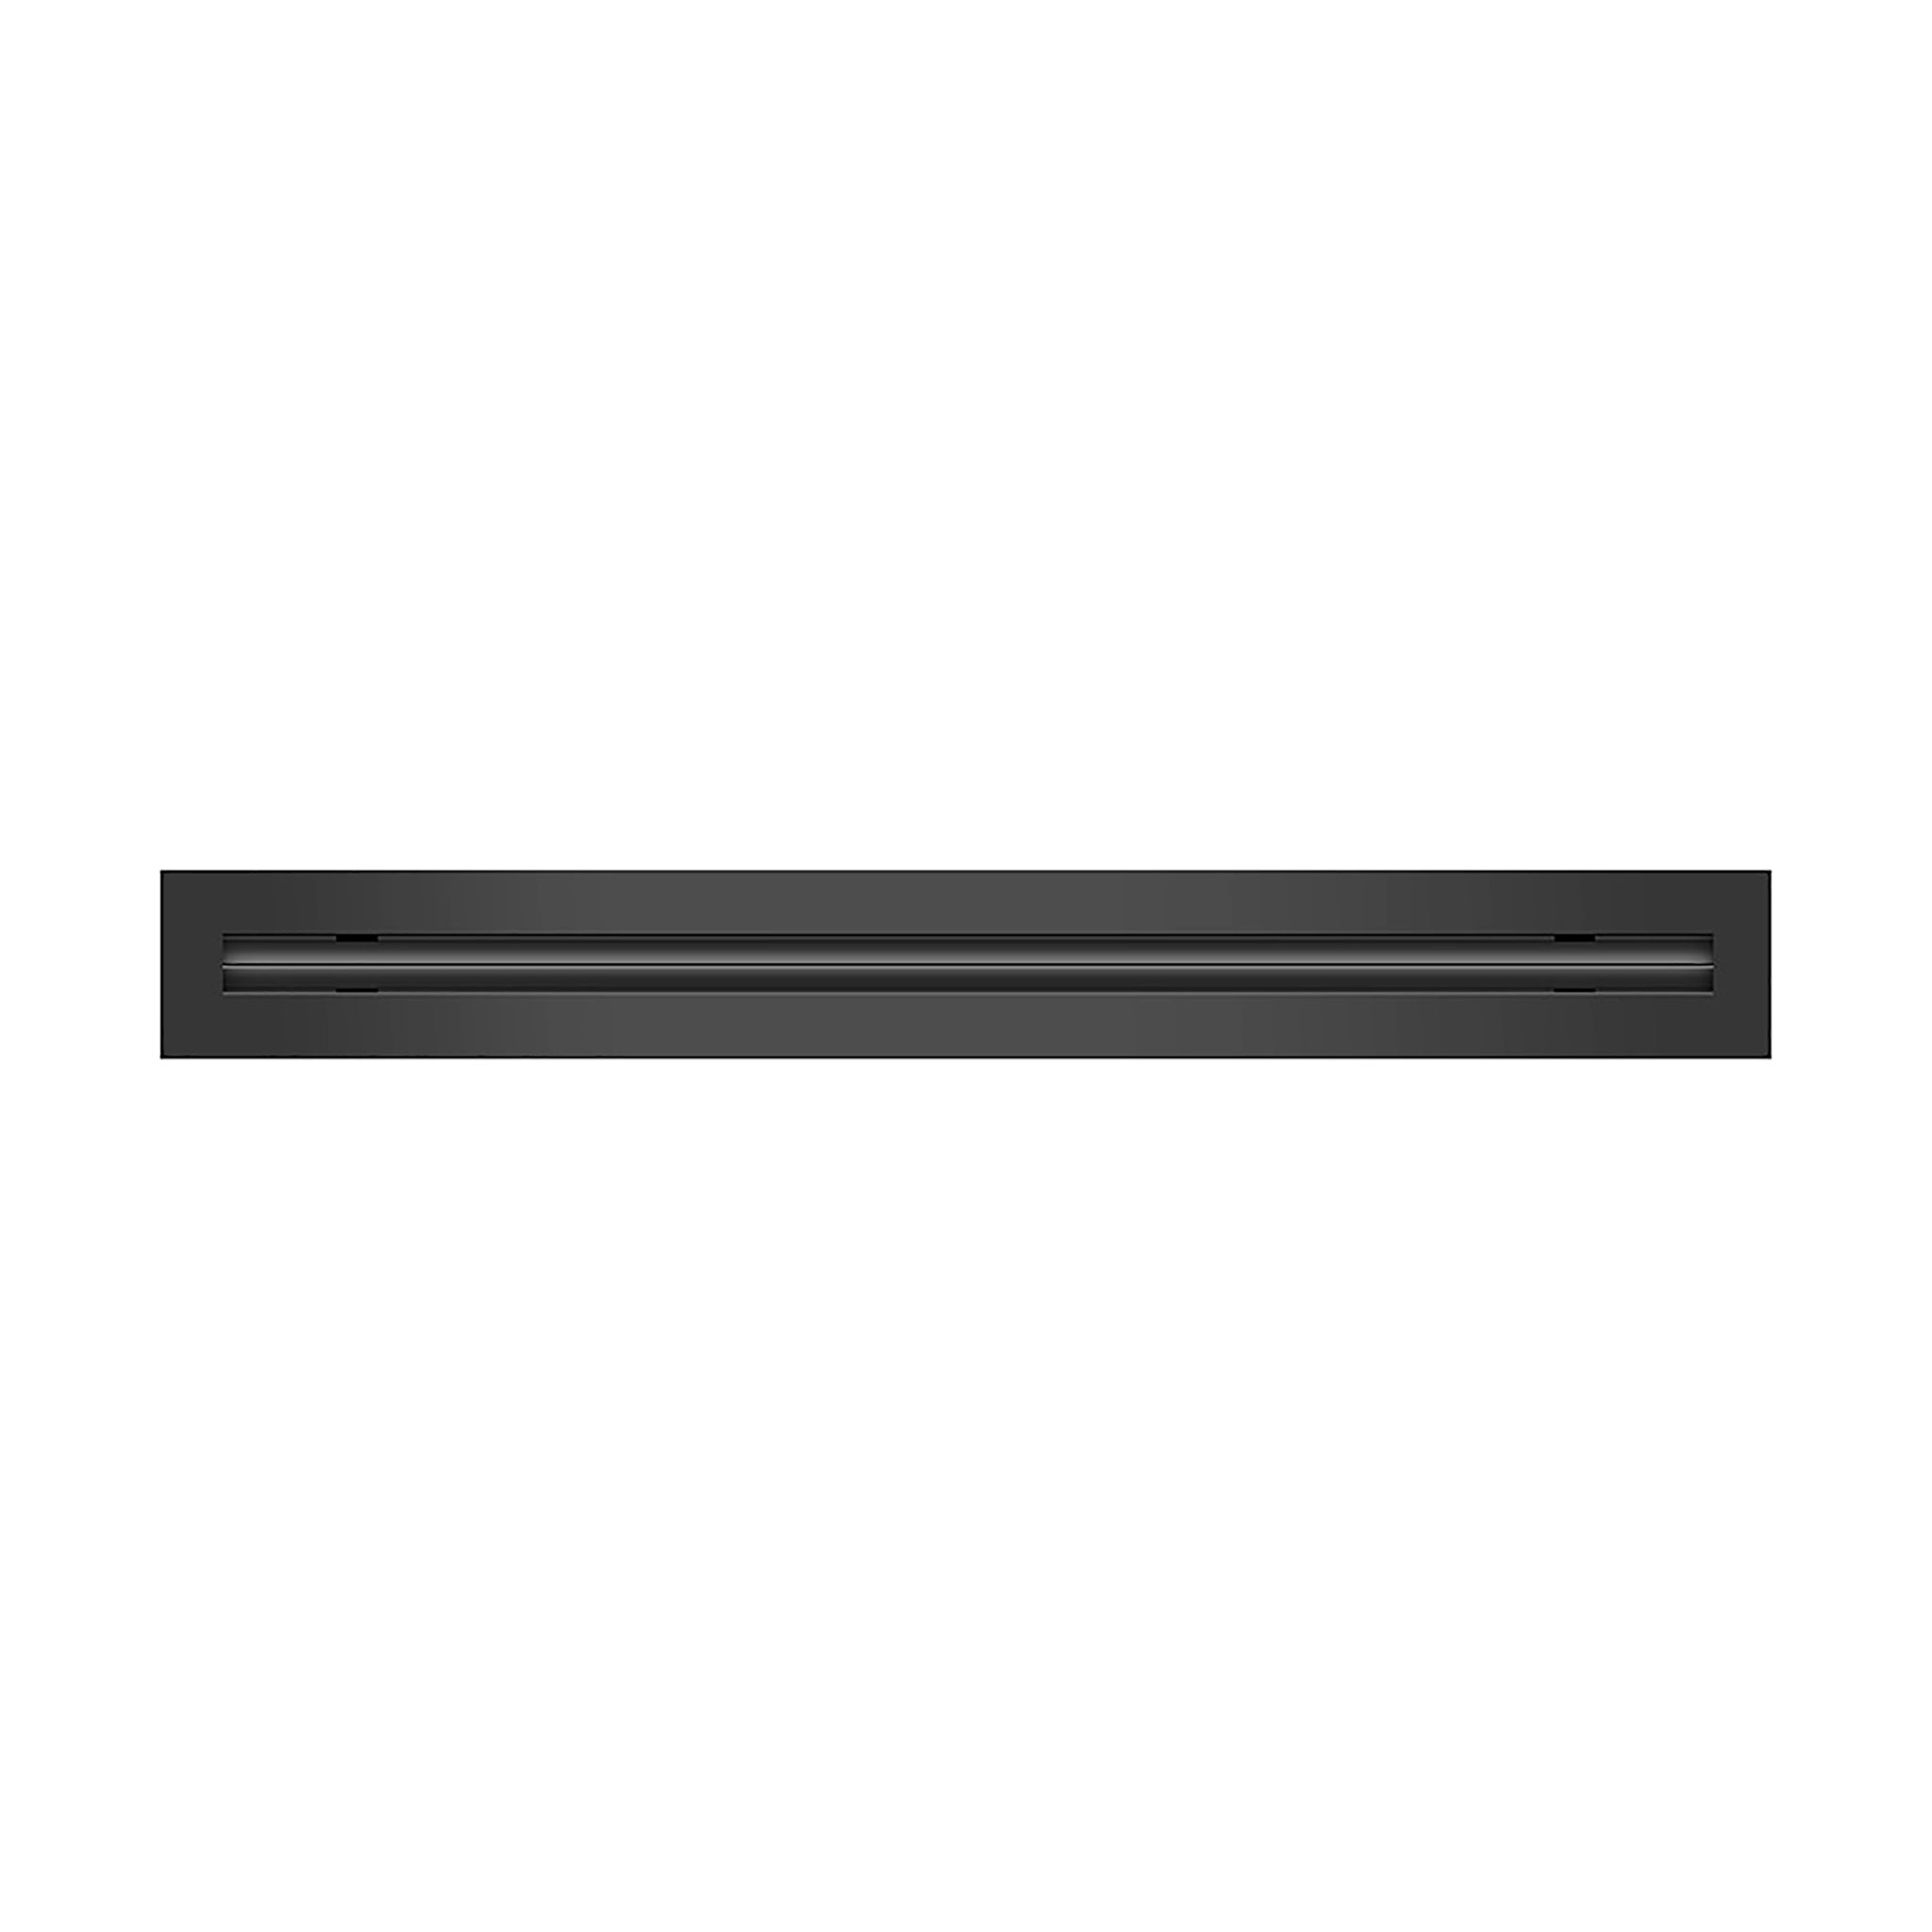 Front of 24 Inch 1 Slot Linear Air Vent Cover Black - 24 Inch 1 Slot Linear Diffuser Black - Texas Buildmart